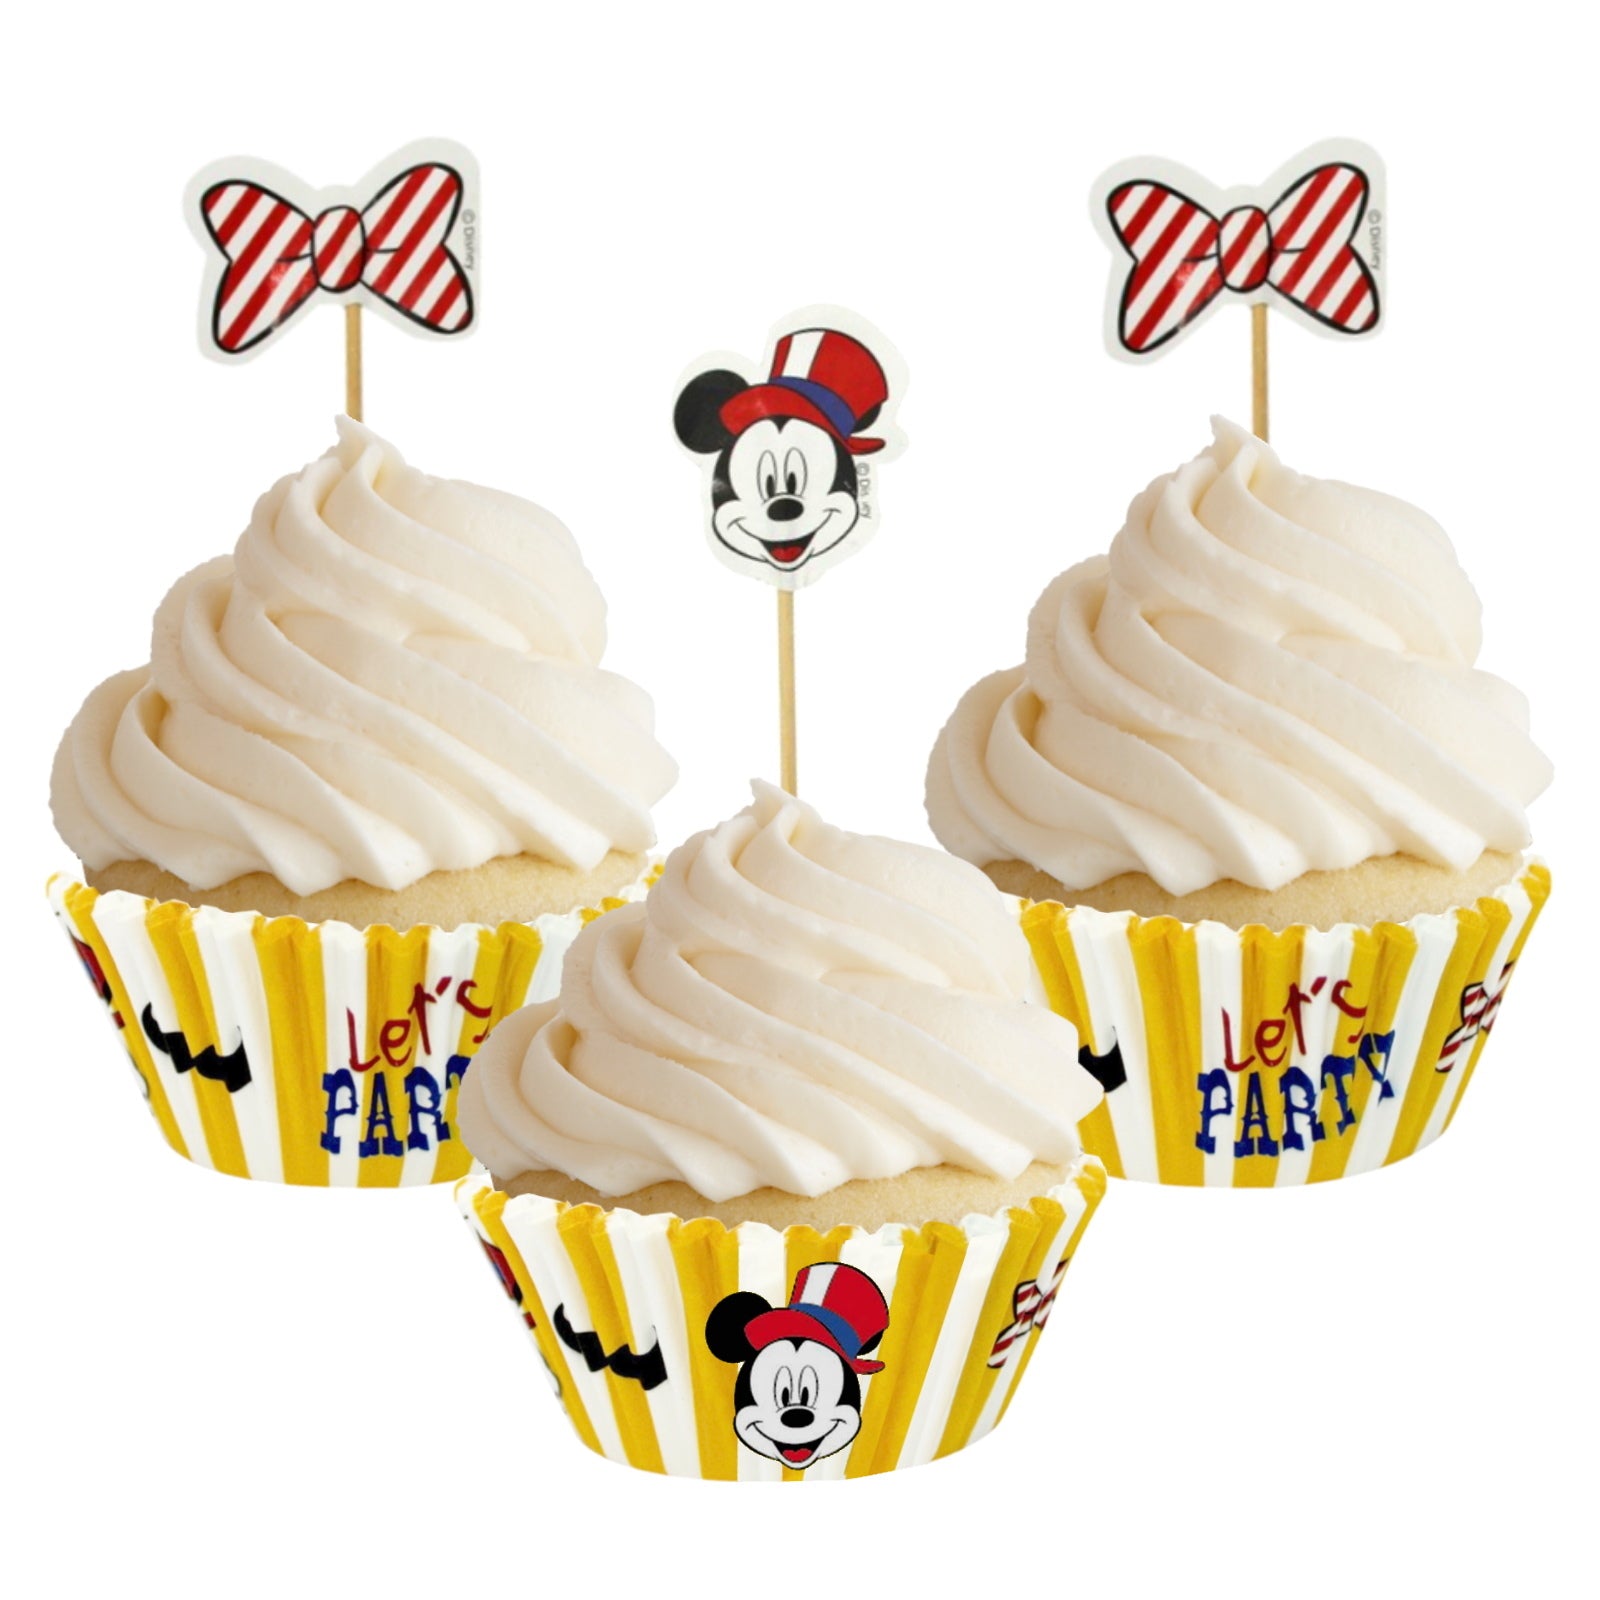 Disney Mickey Mouse Vintage Carnival cupcake cases - pack of 24